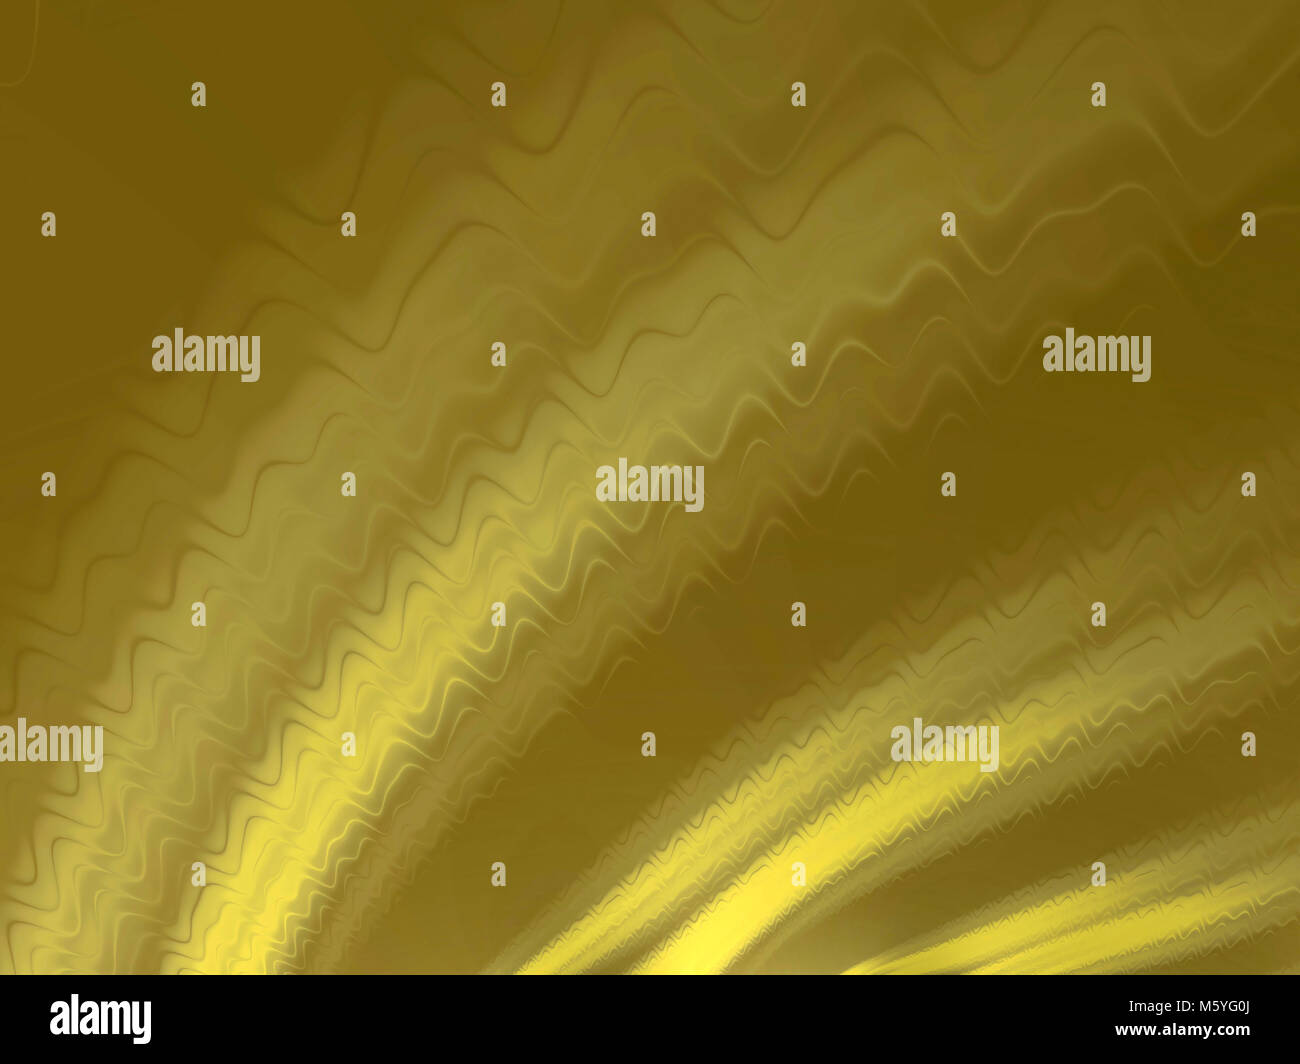 soft fractal waves pattern. light brown background with yellow rays. Stock Photo